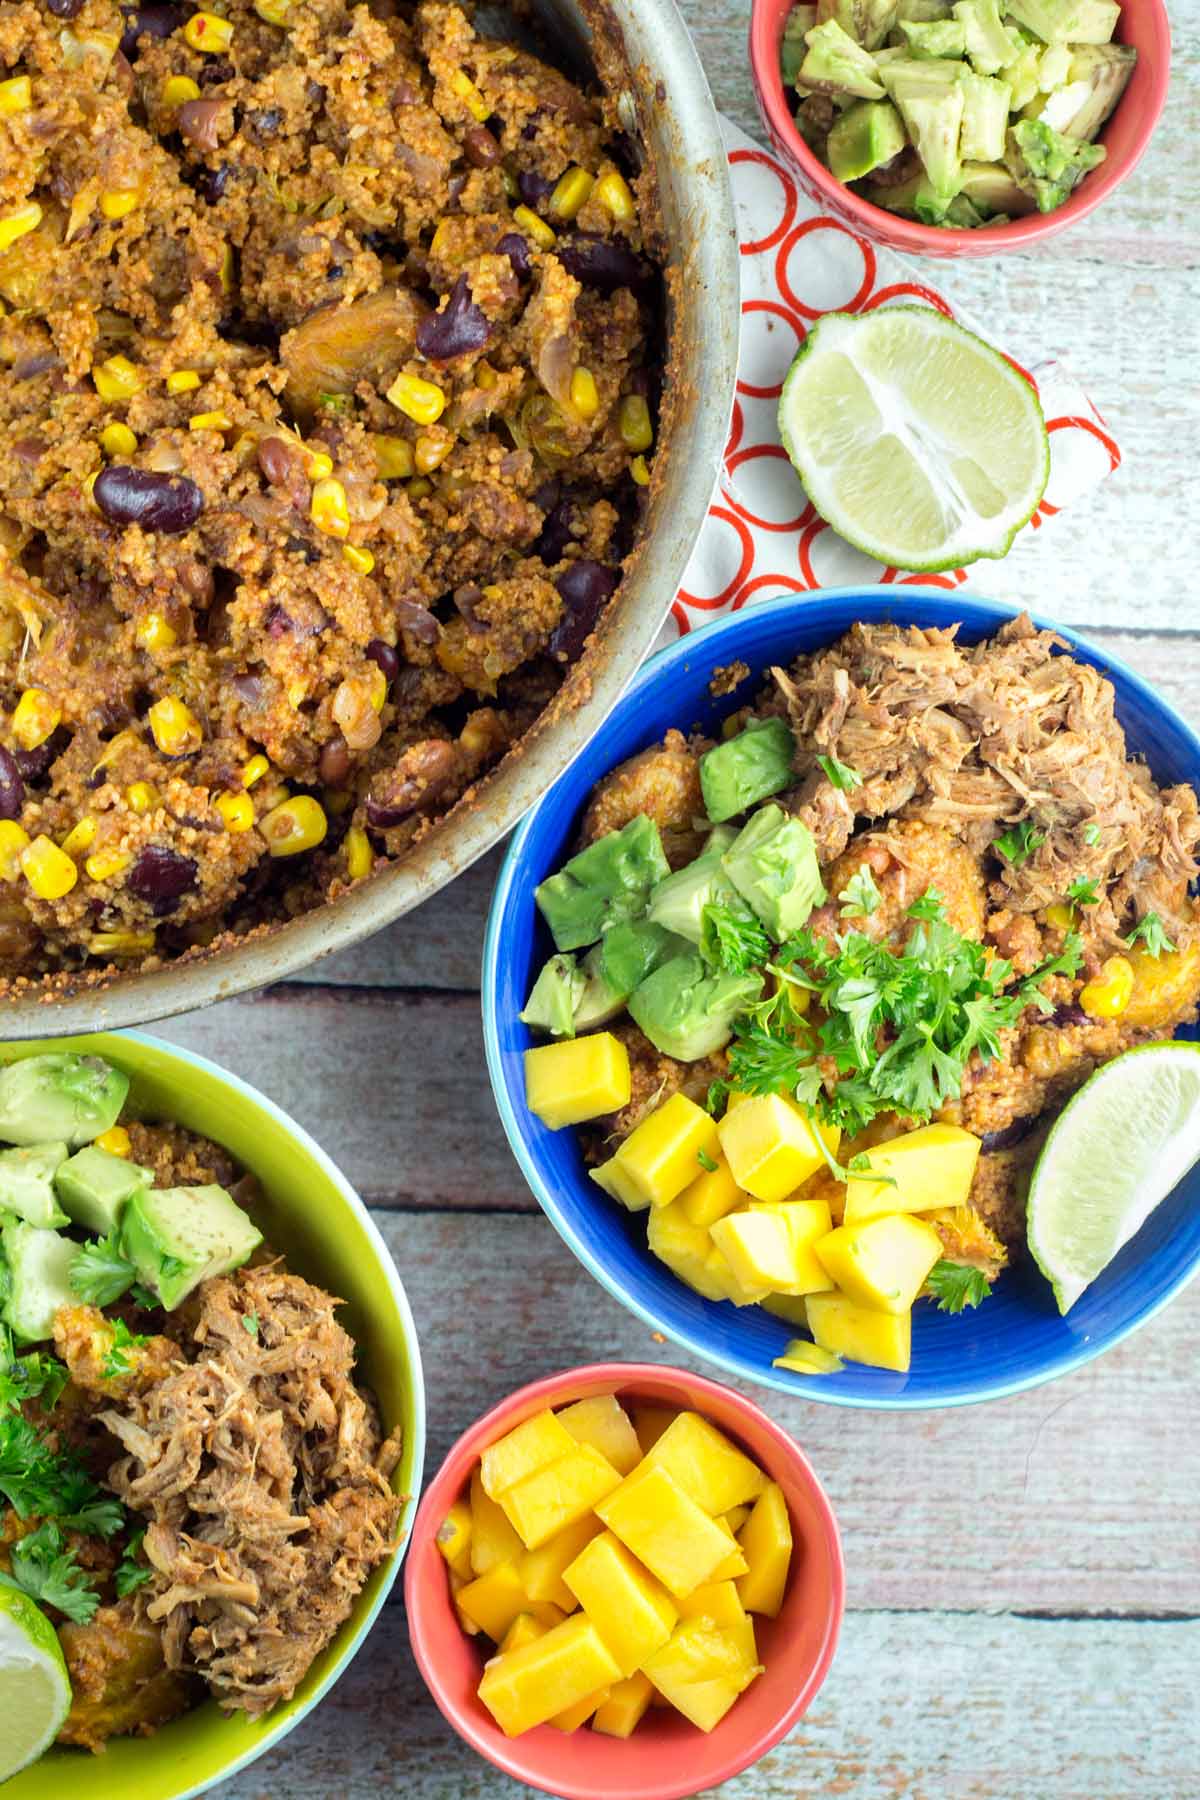 overhead view showing a couscous bowl with mango, avocado, pulled pork, and limes.